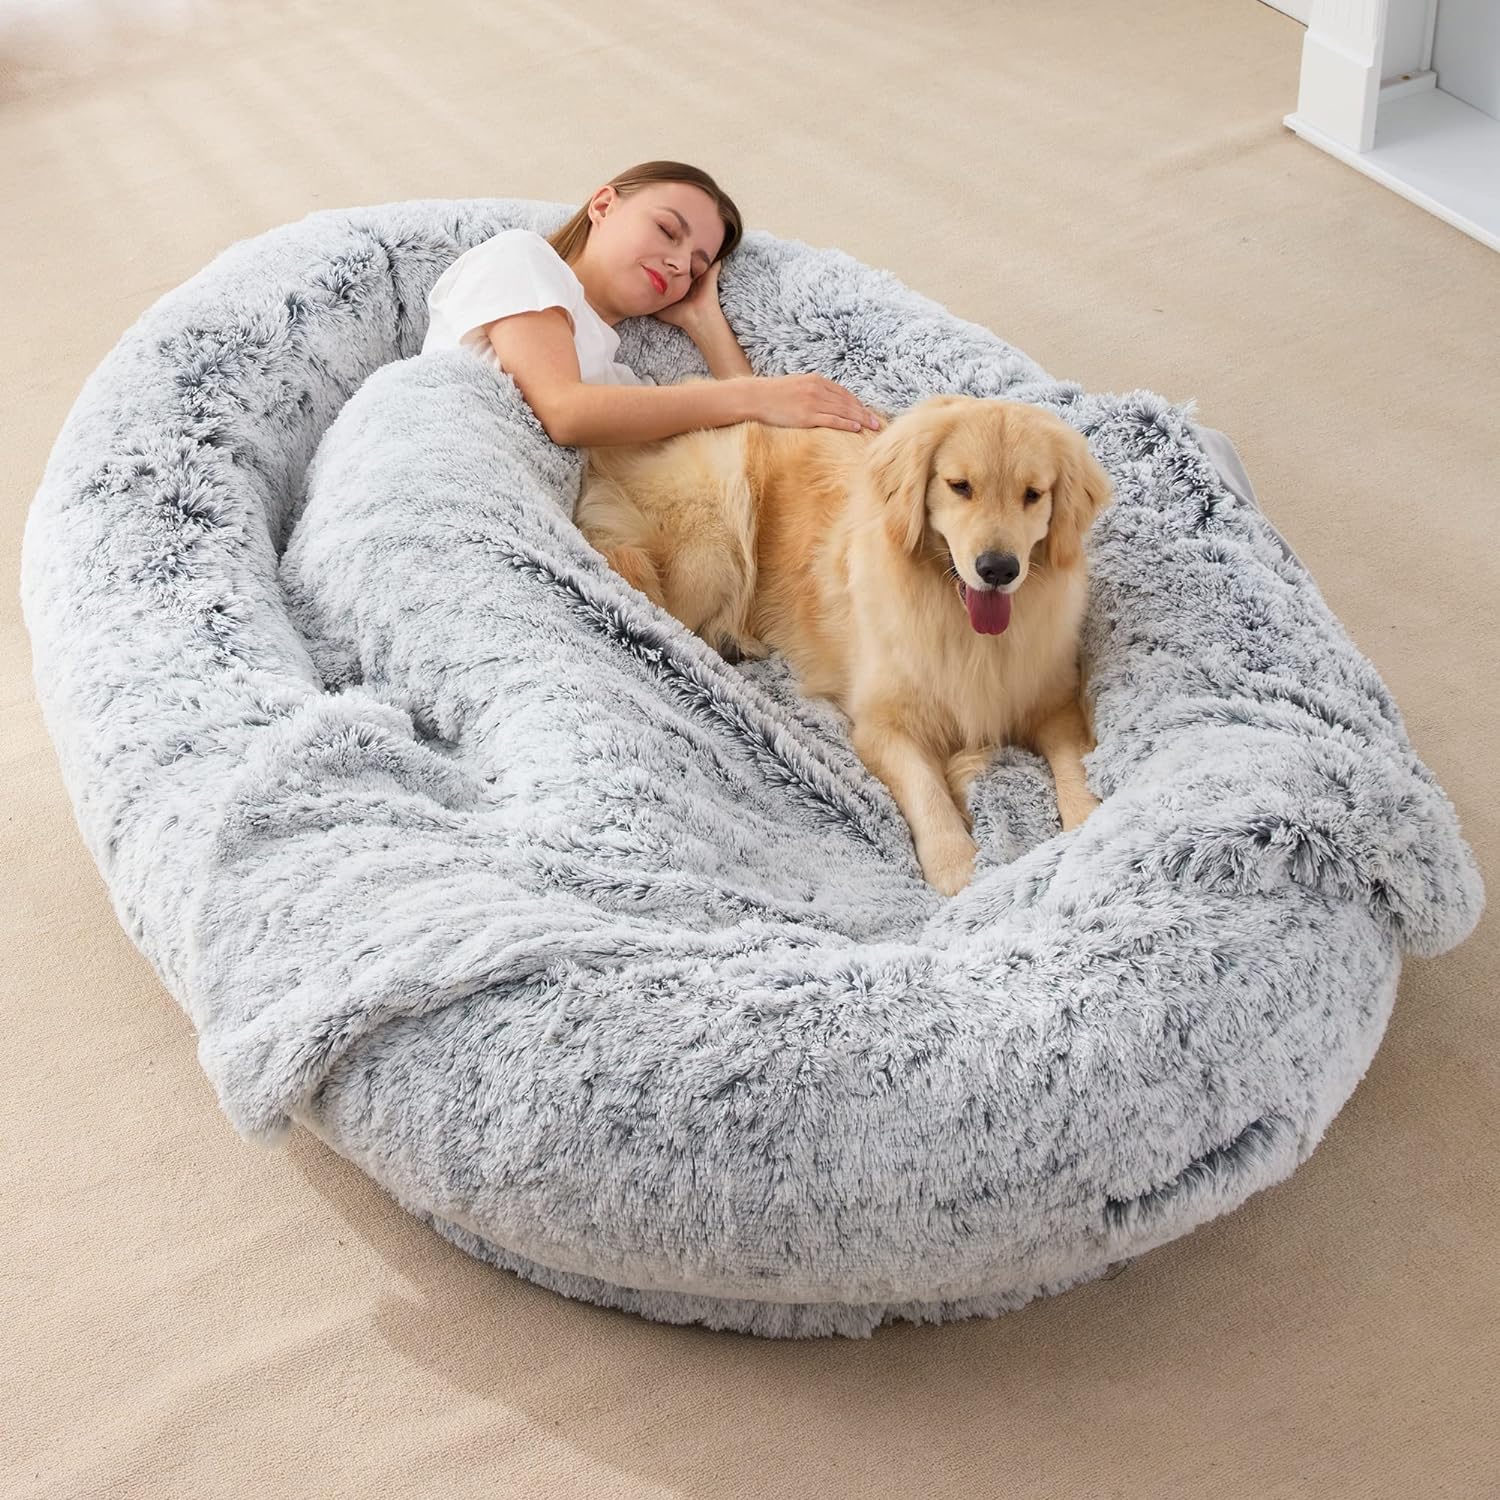 Homguava Large Human Dog Bed 75.5x55x12 Human-Sized Big Dog Bed for Adults&Pets Giant Beanbag Bed with Washable Fur Cover,Blanket and Strap, Grey Plush